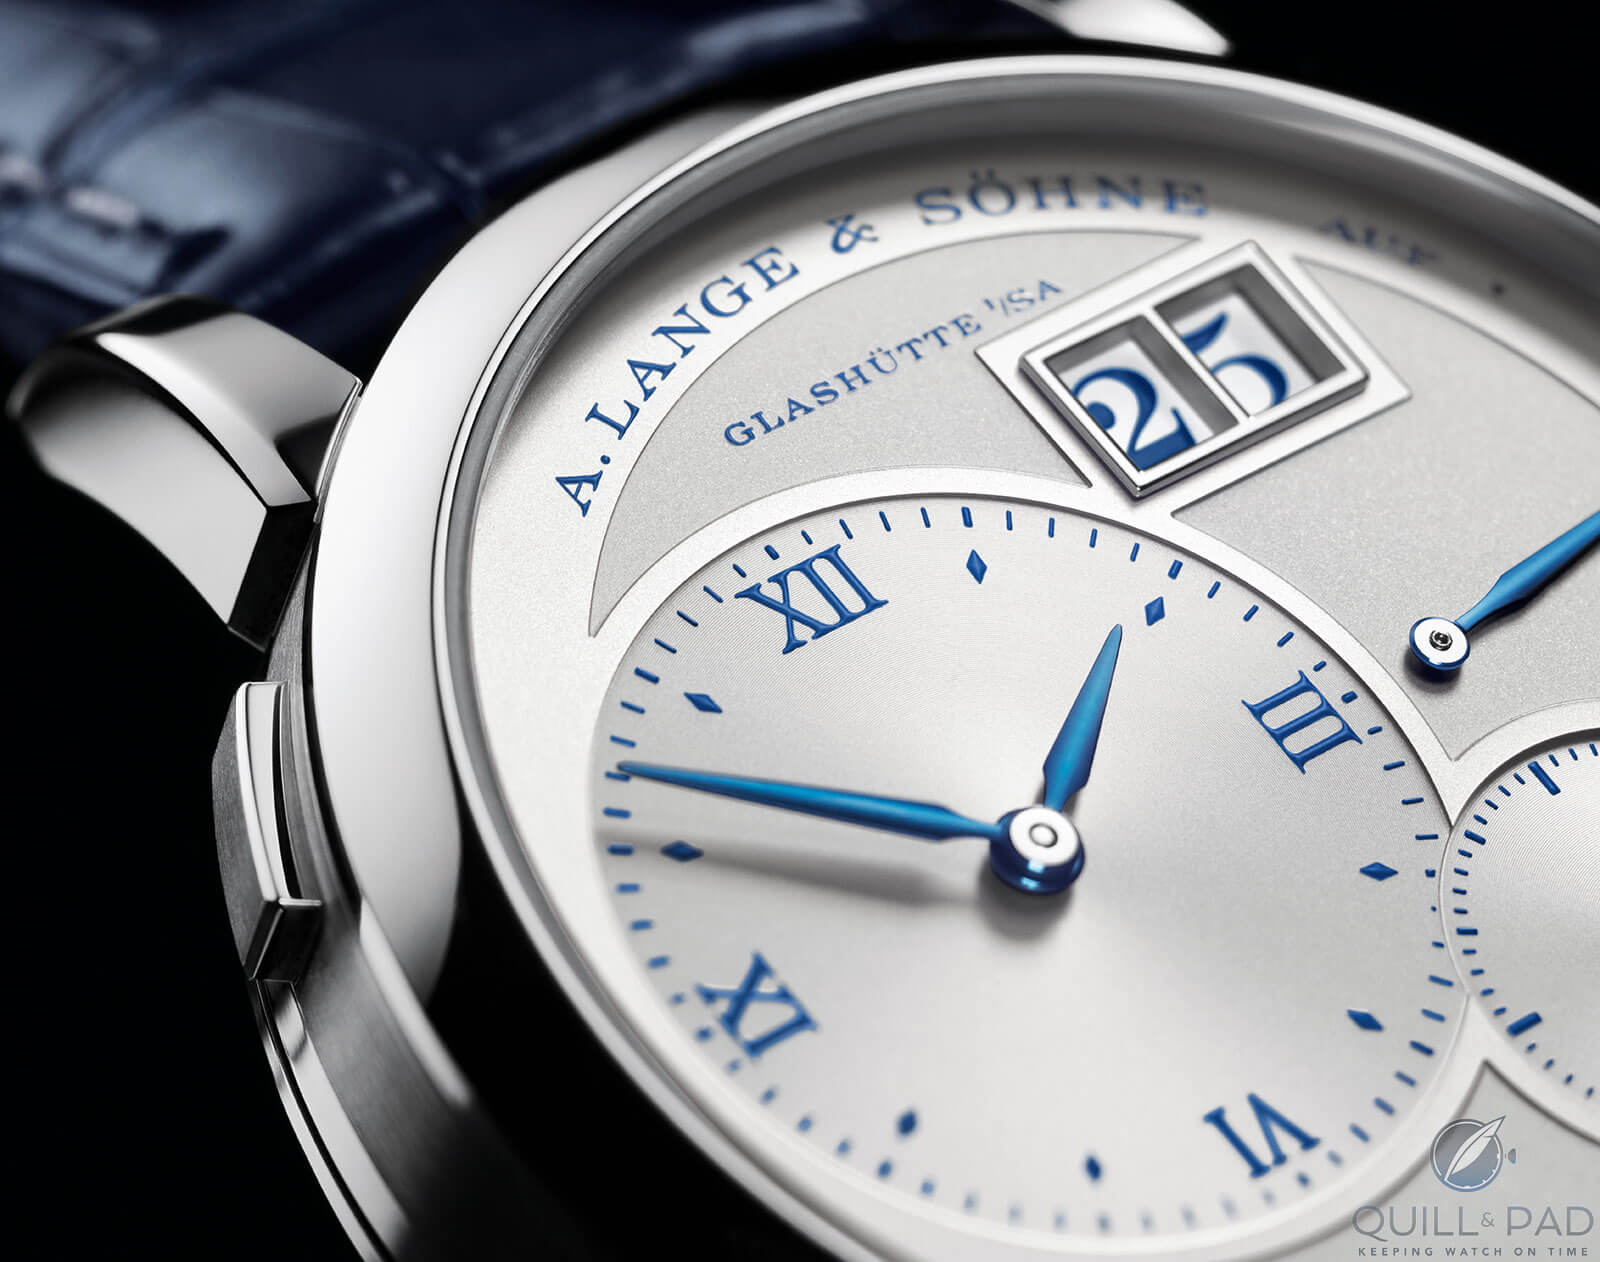 Close up look at the dial of the A. Lange & Söhne Lange 1 25th Anniversary Edition